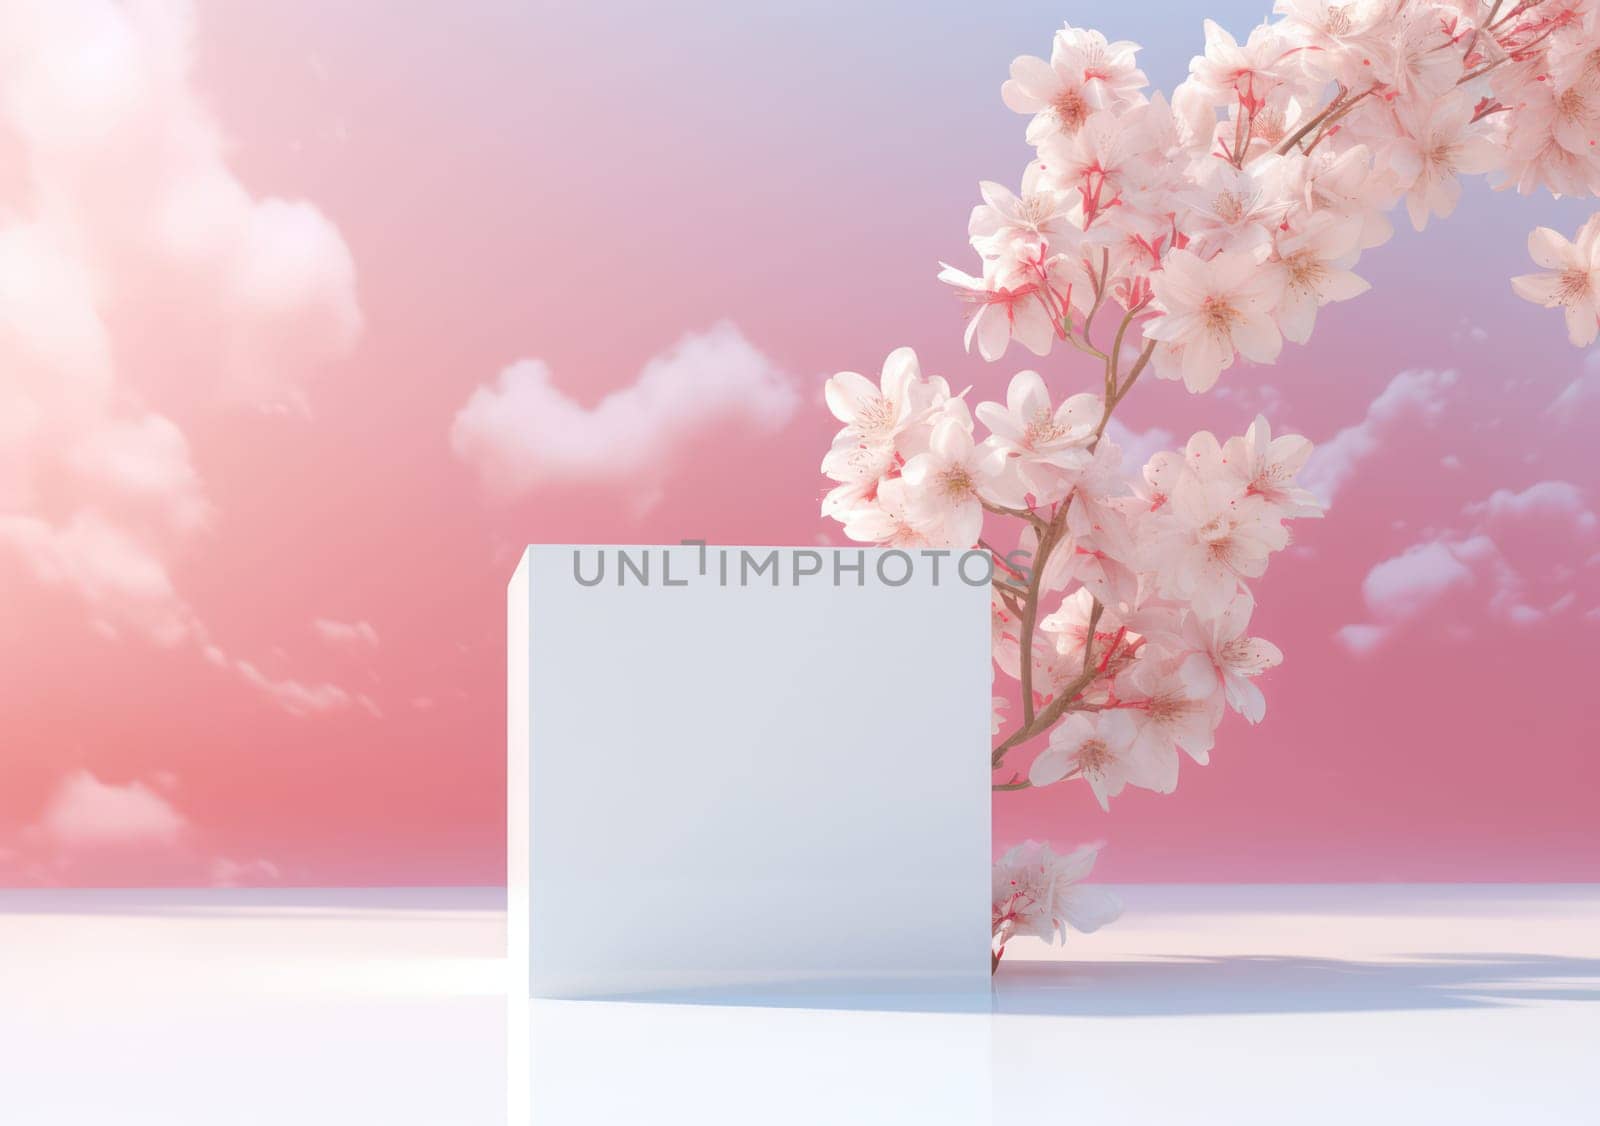 Pastel Blossoms: A Romantic Sakura Cherry Tree in Full Bloom, Framed by Fresh White Petals on a Soft Pink Background.